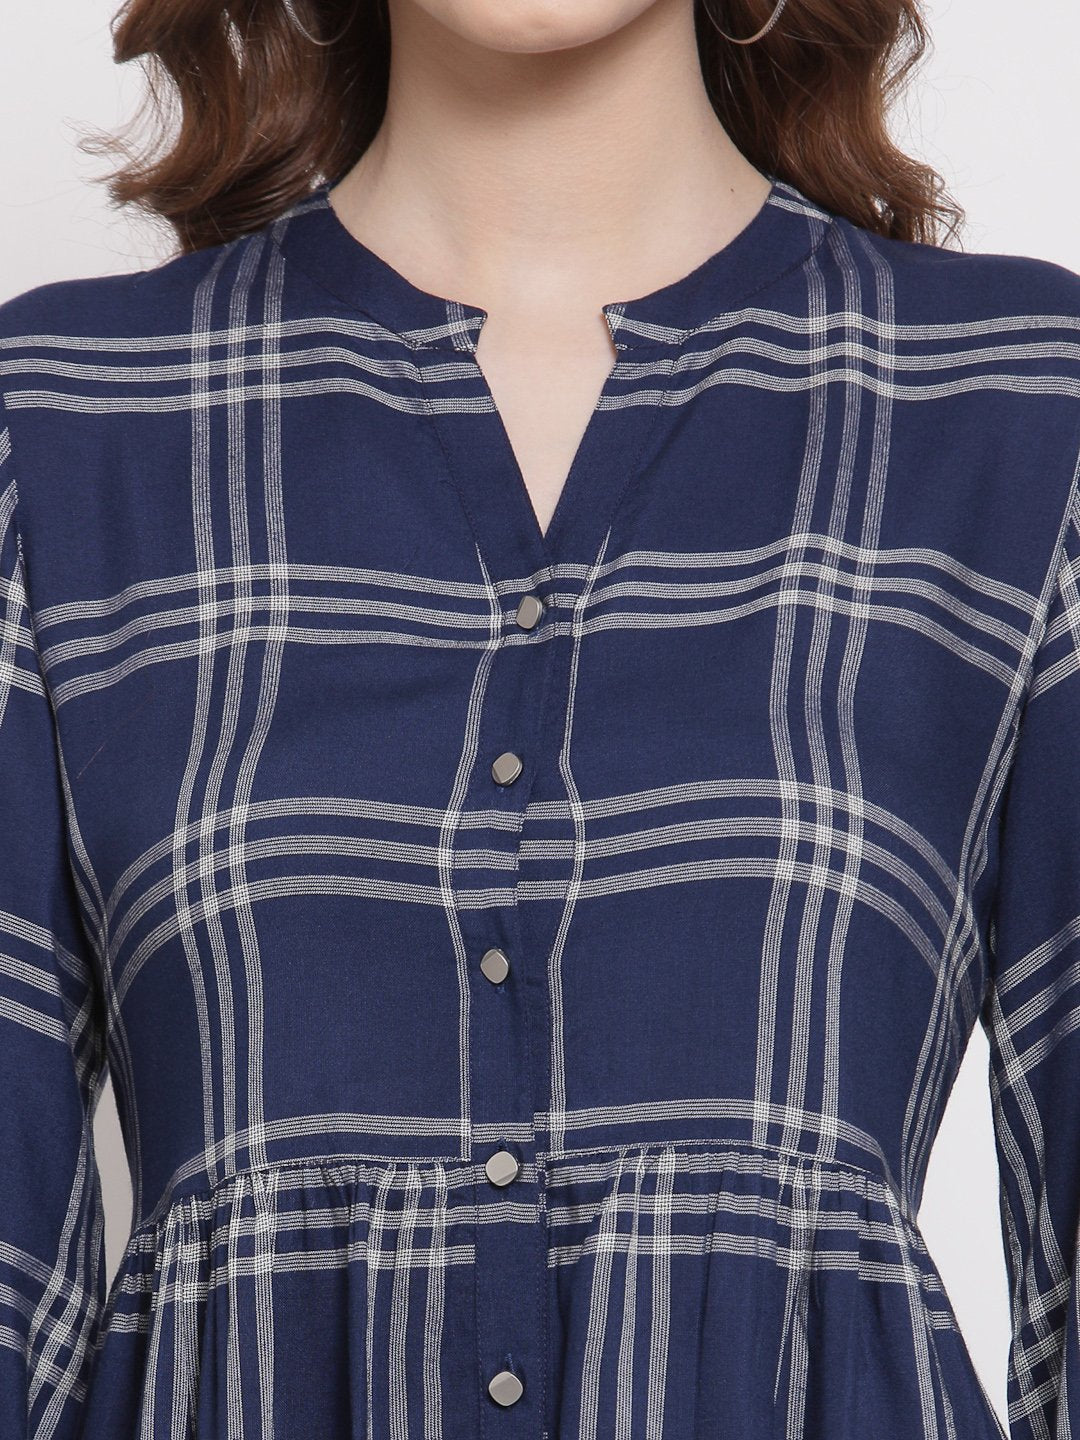 Blue Checks Fit & Flare Dress Dresses Terquois Klothing   